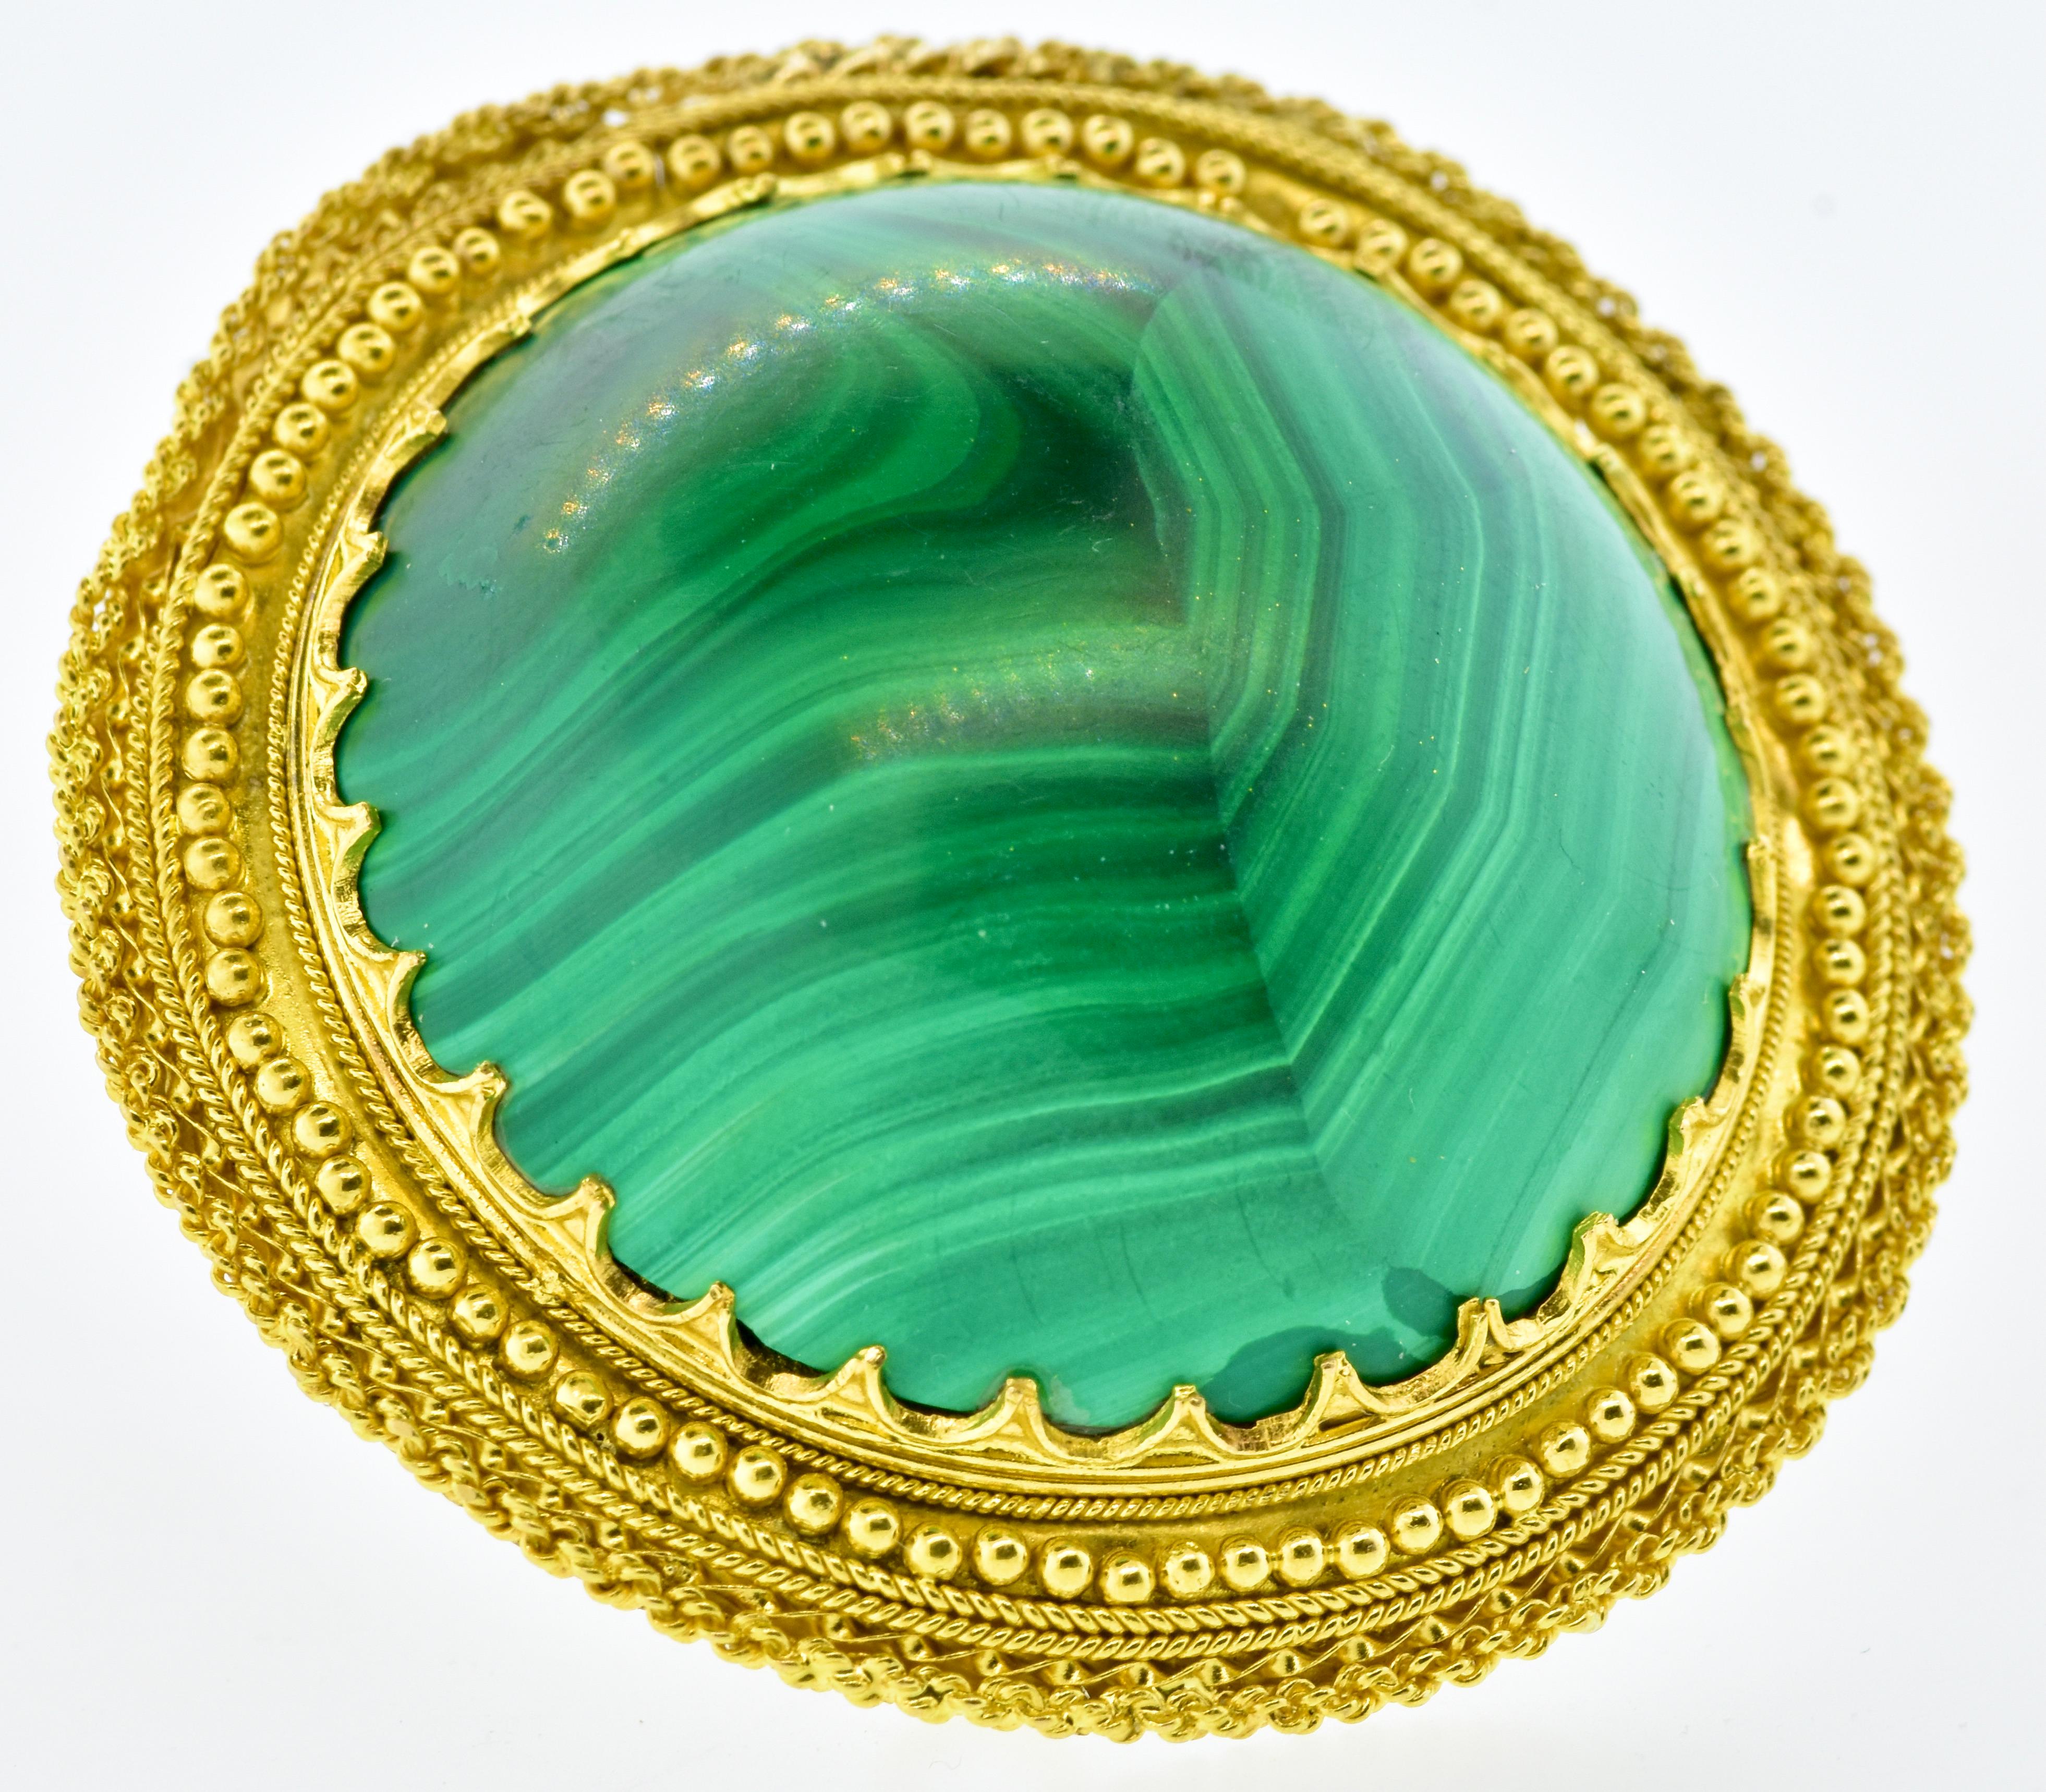 Etruscan Revival Antique 18K and Malachite Large Brooch, c. 1880